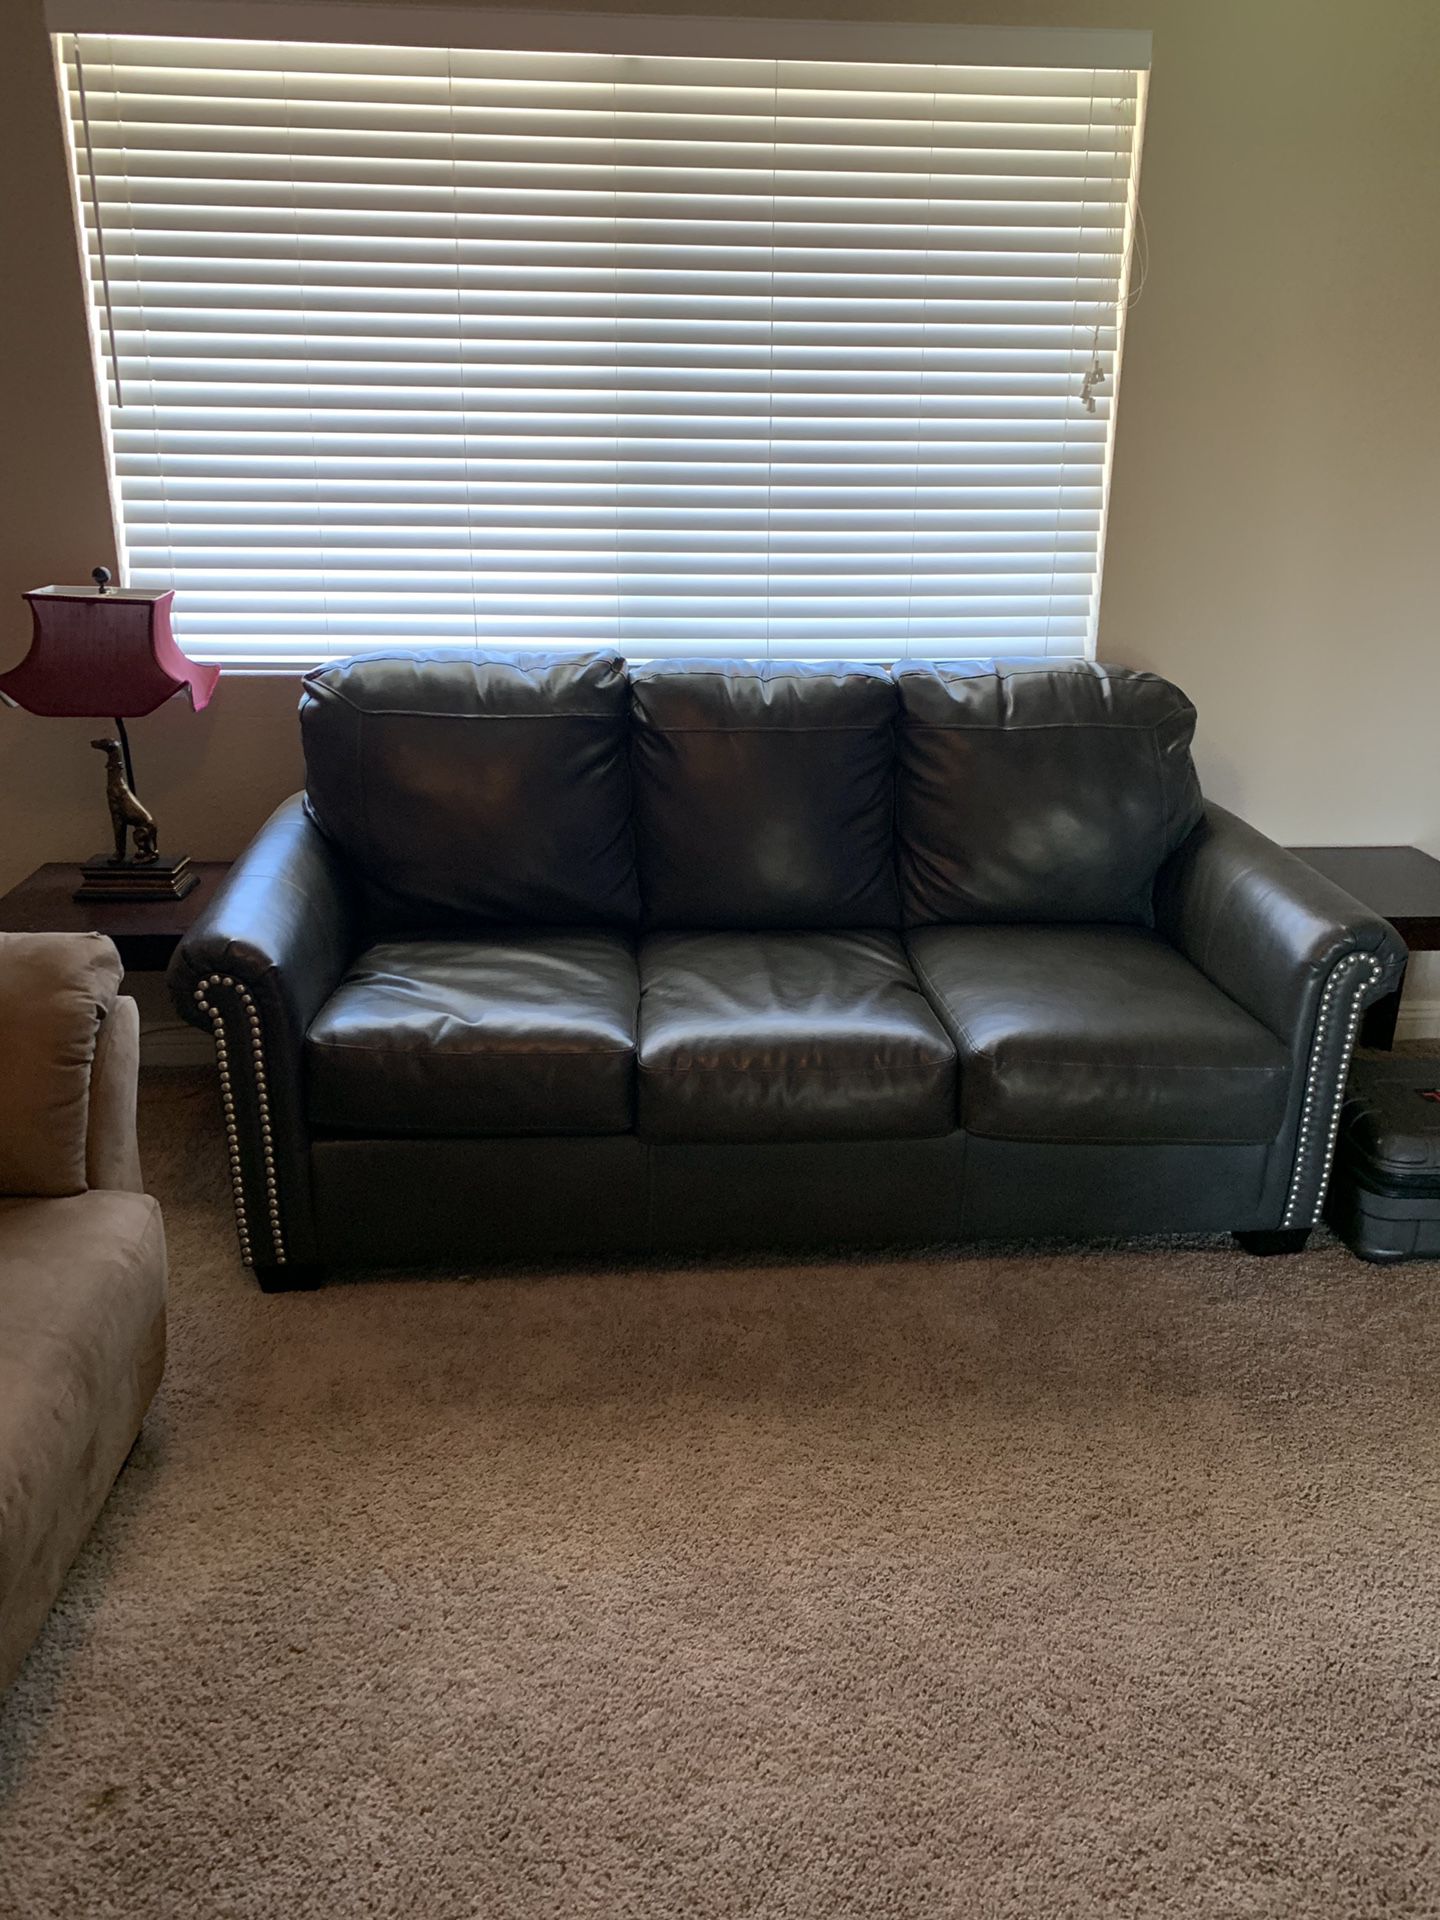 Fold out leather couch/bed